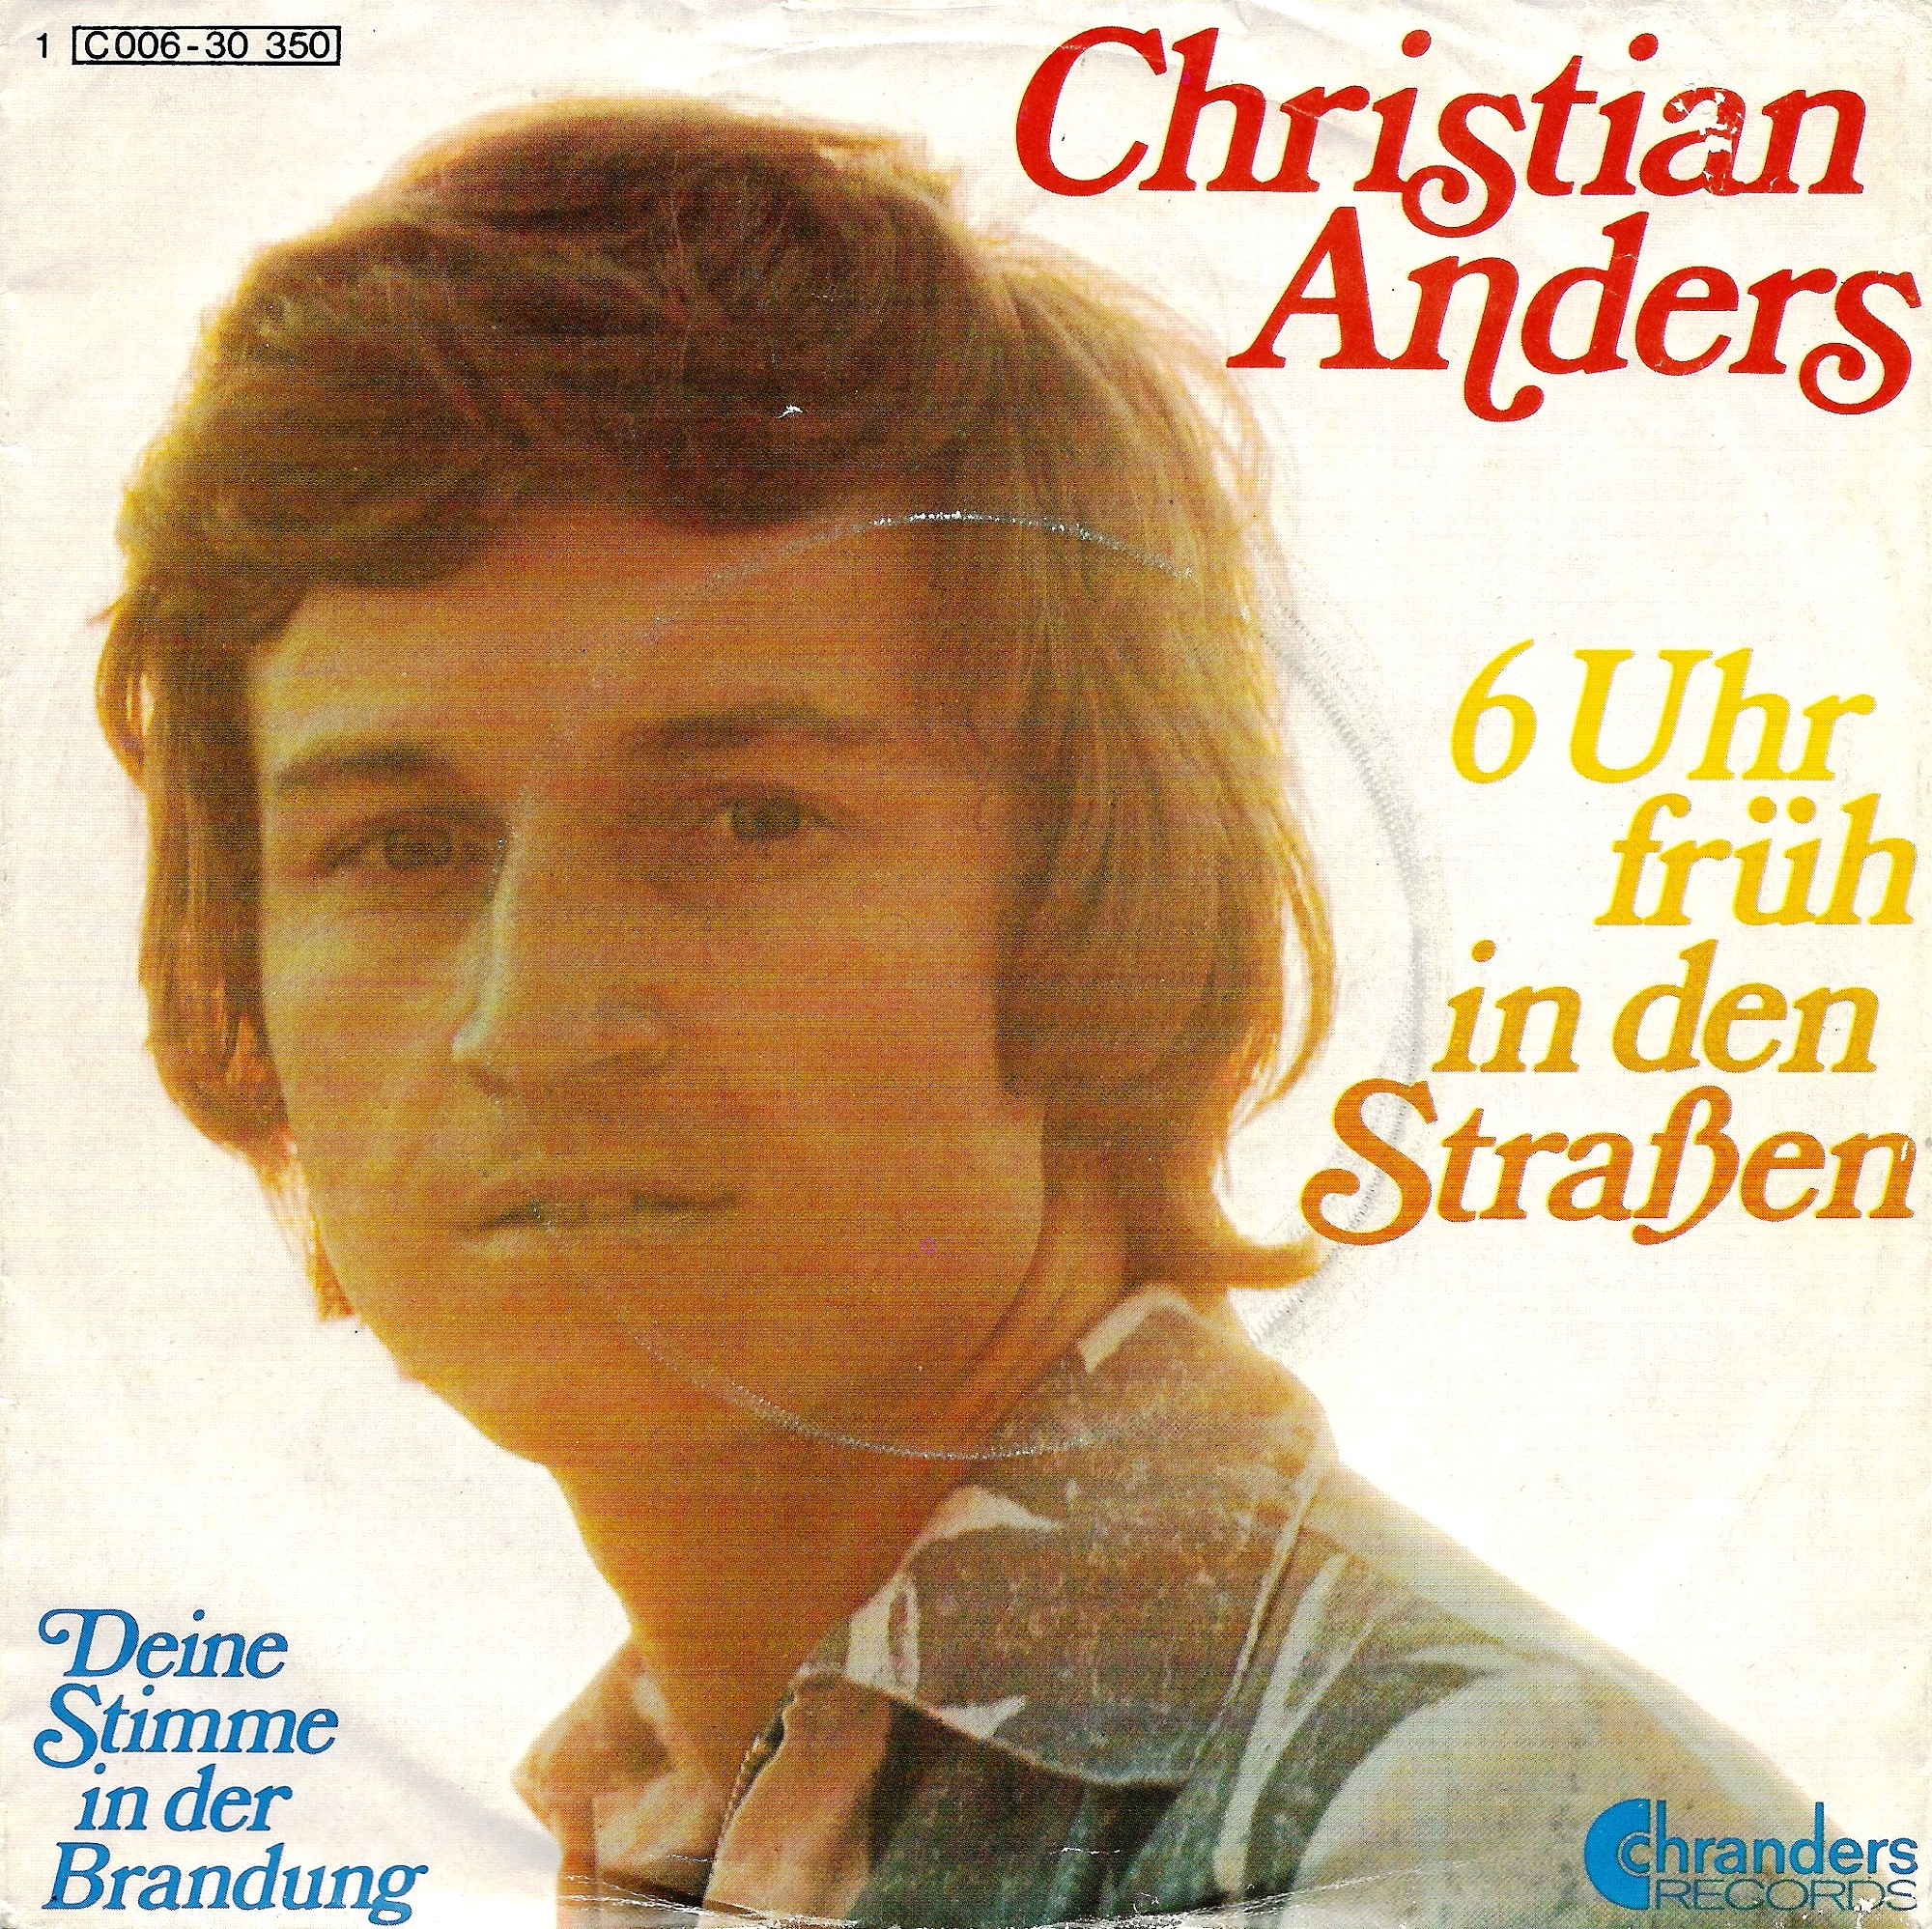 6 Uhr Früh In Den Straßen - Christian Anders music collectible - Main Image 1